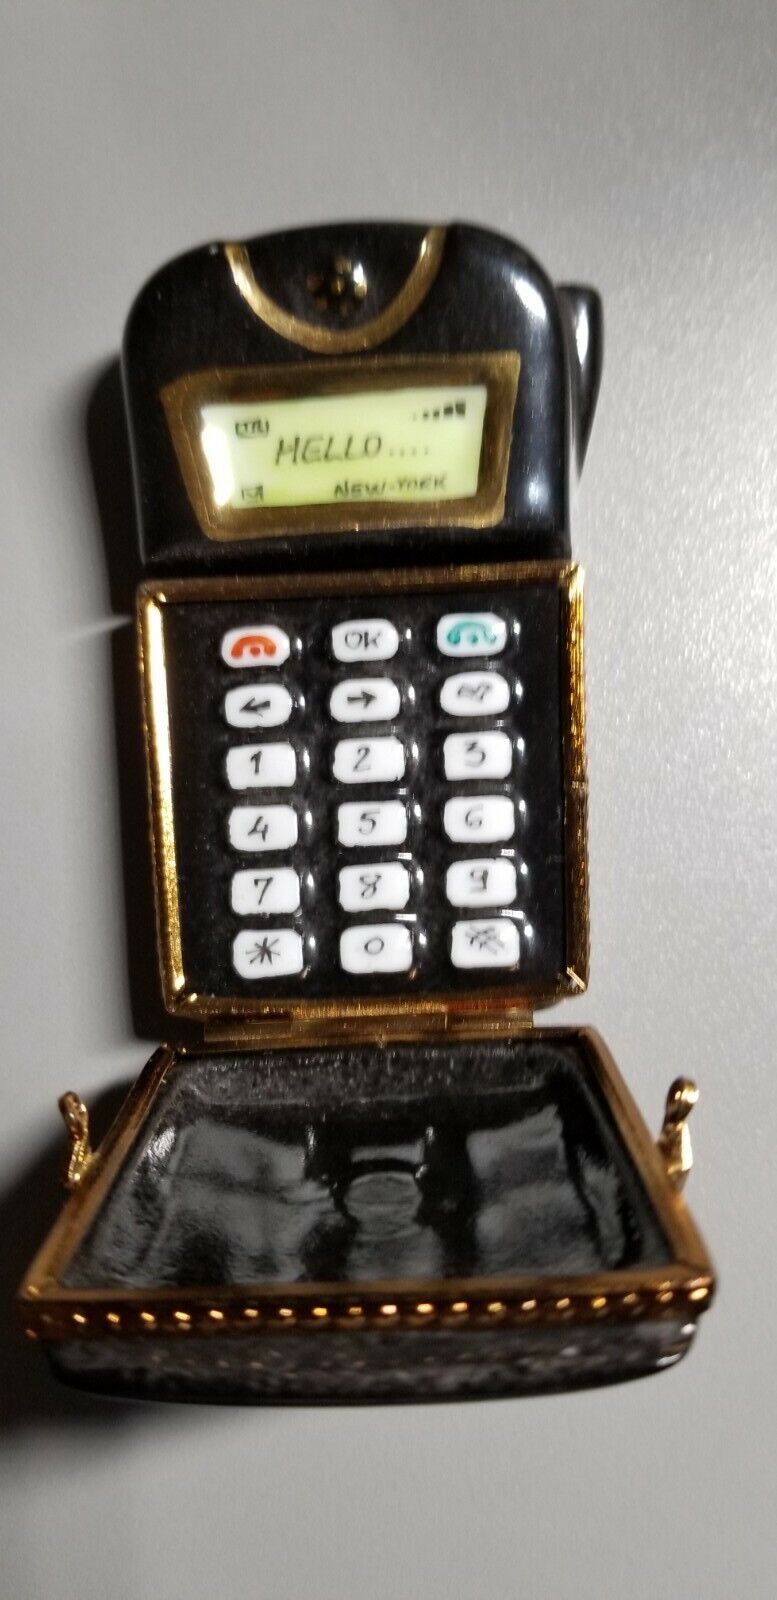 🔥 Rochard Limoges Flip Cell Phone Very Rare Collectable Ceramic 5G Telephone 🔥